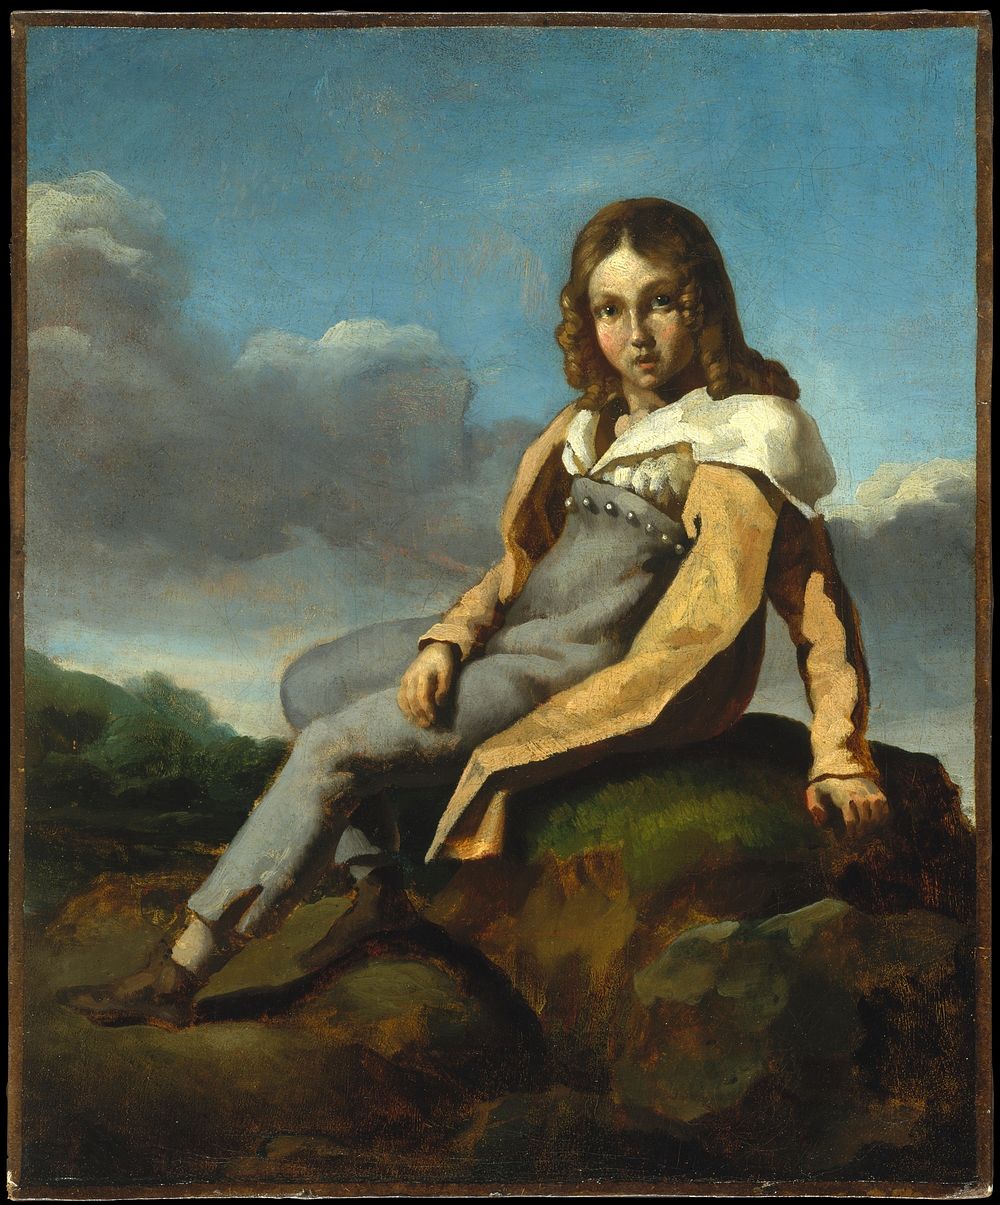 Alfred Dedreux (1810&ndash;1860) as a Child by Th&eacute;odore Gericault